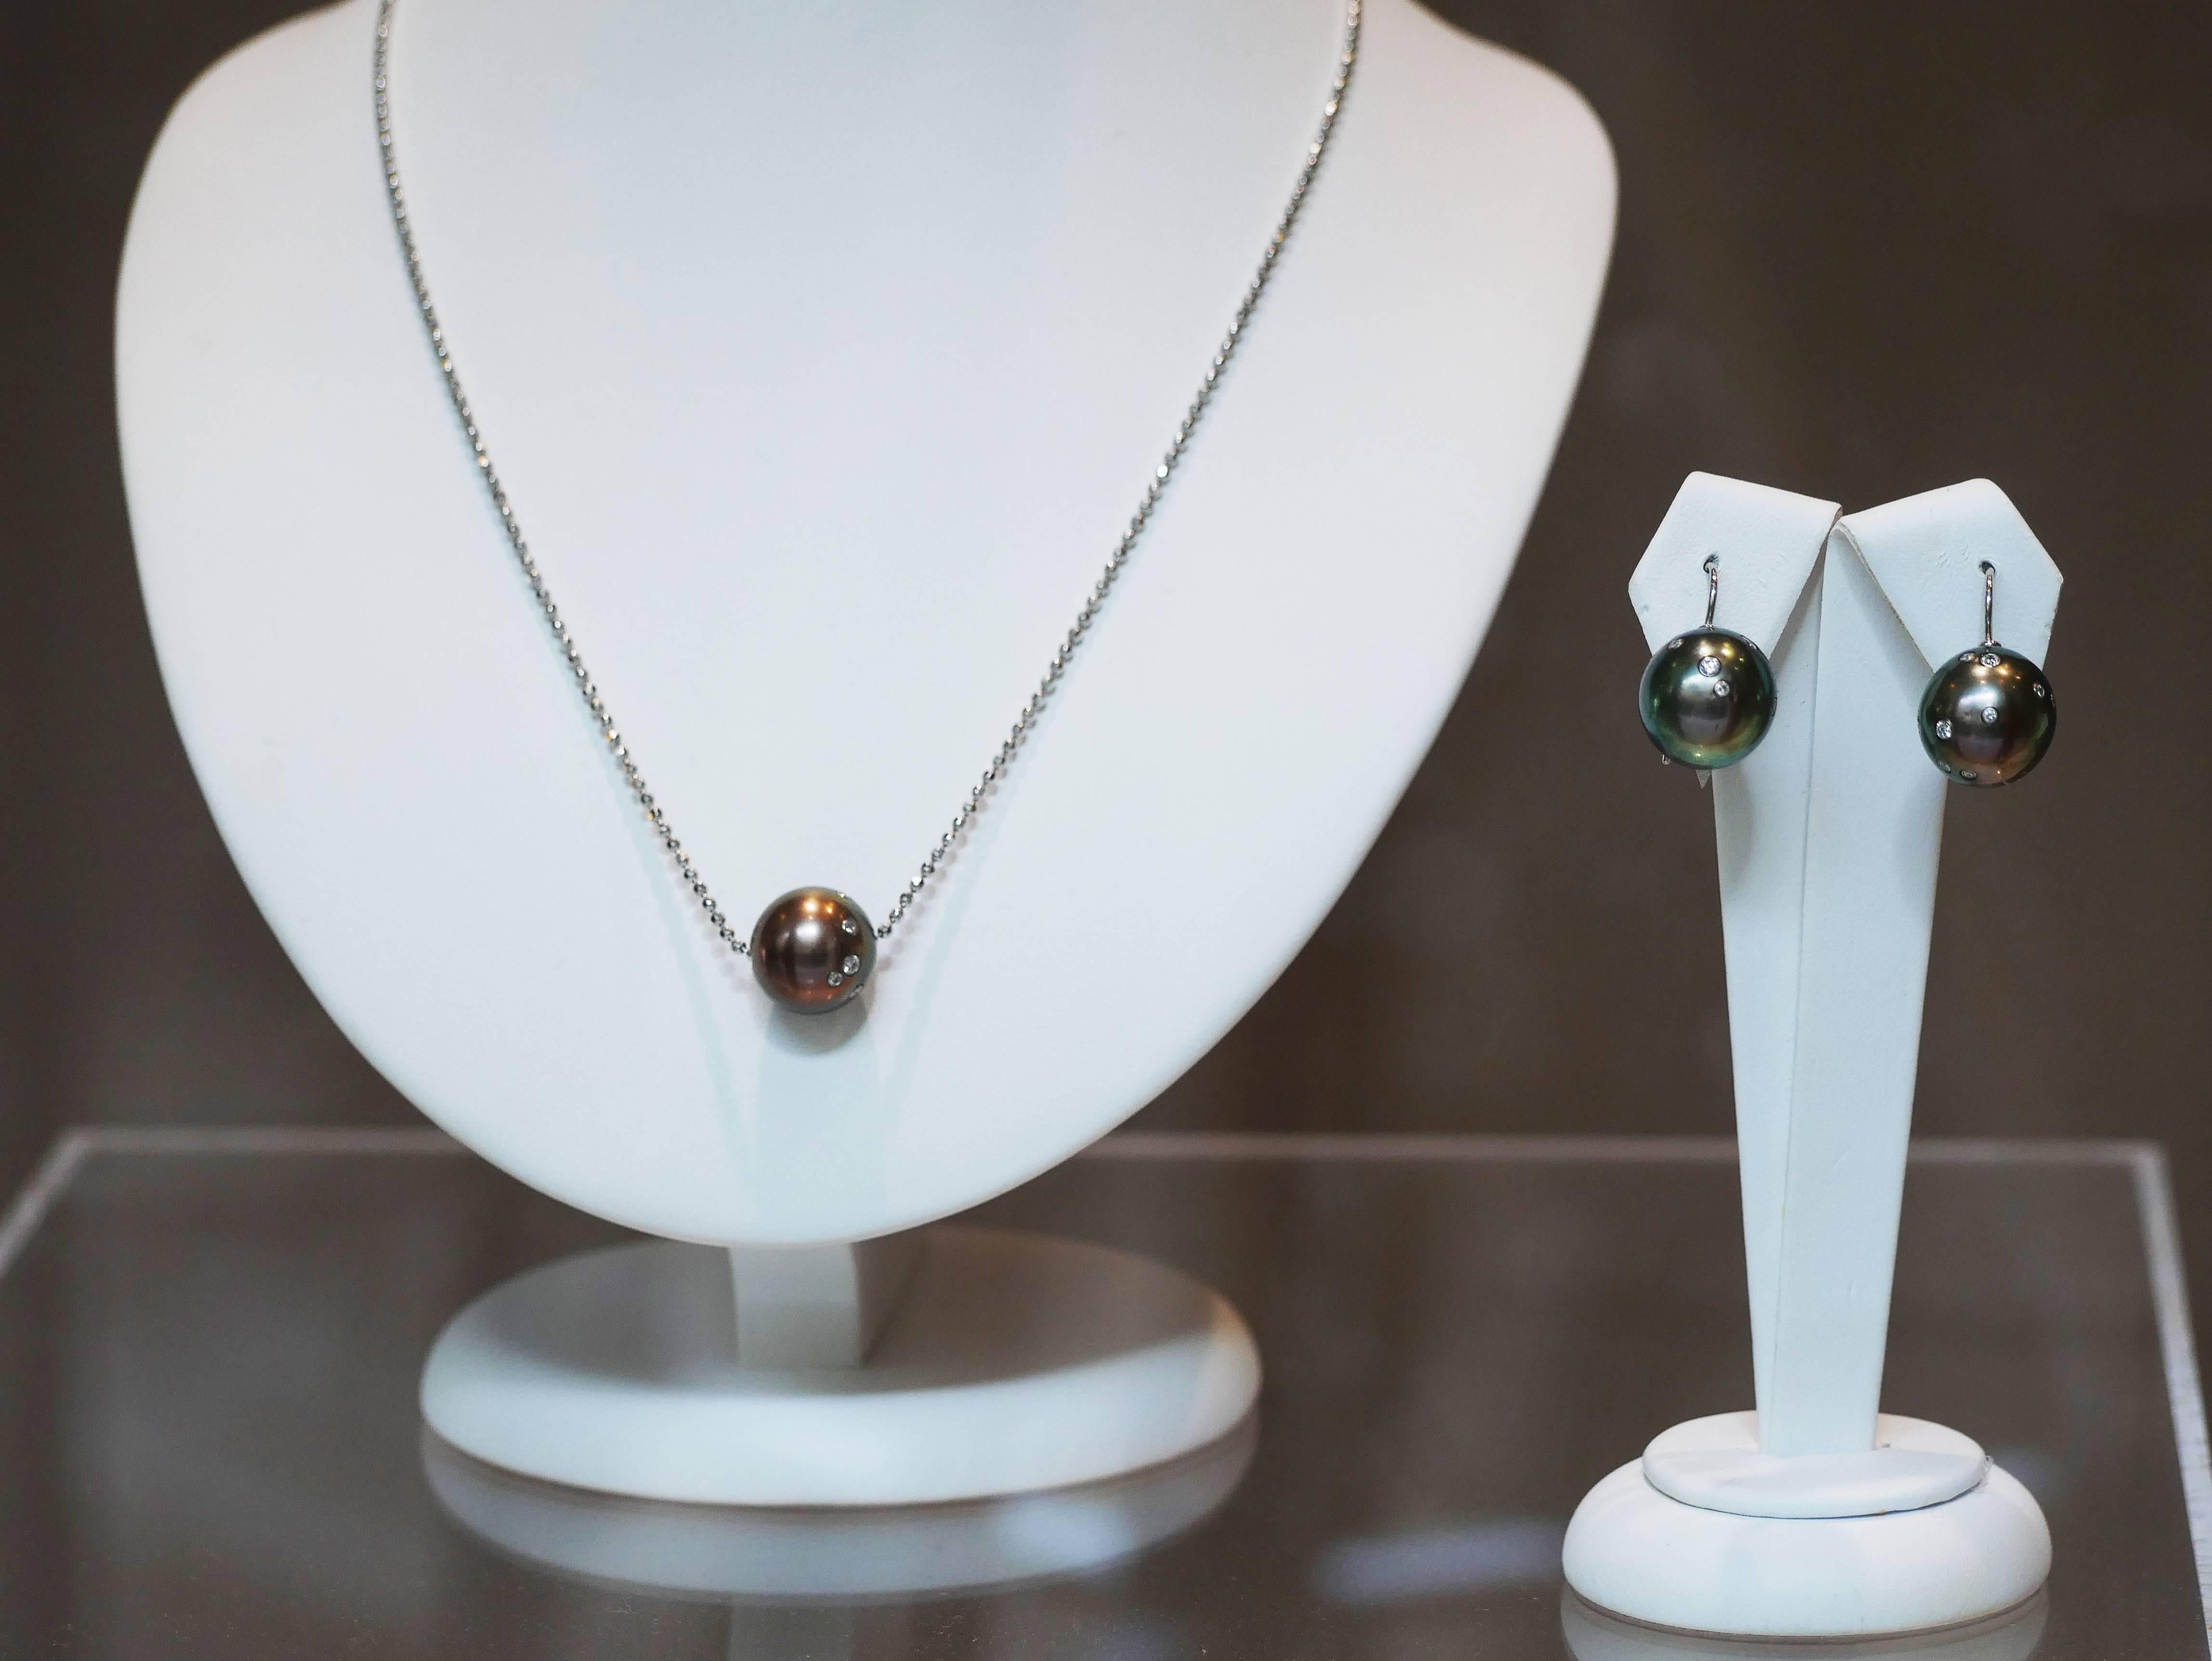 A enchanting Tahitian Pearl necklace intricately set with diamonds. 

Featuring 8 brilliant white diamonds exquisitely embedded in a Tahitian Pearl Pendant creating a vibrant sparkle reminiscent of radiant stars sparkling brilliantly in the night